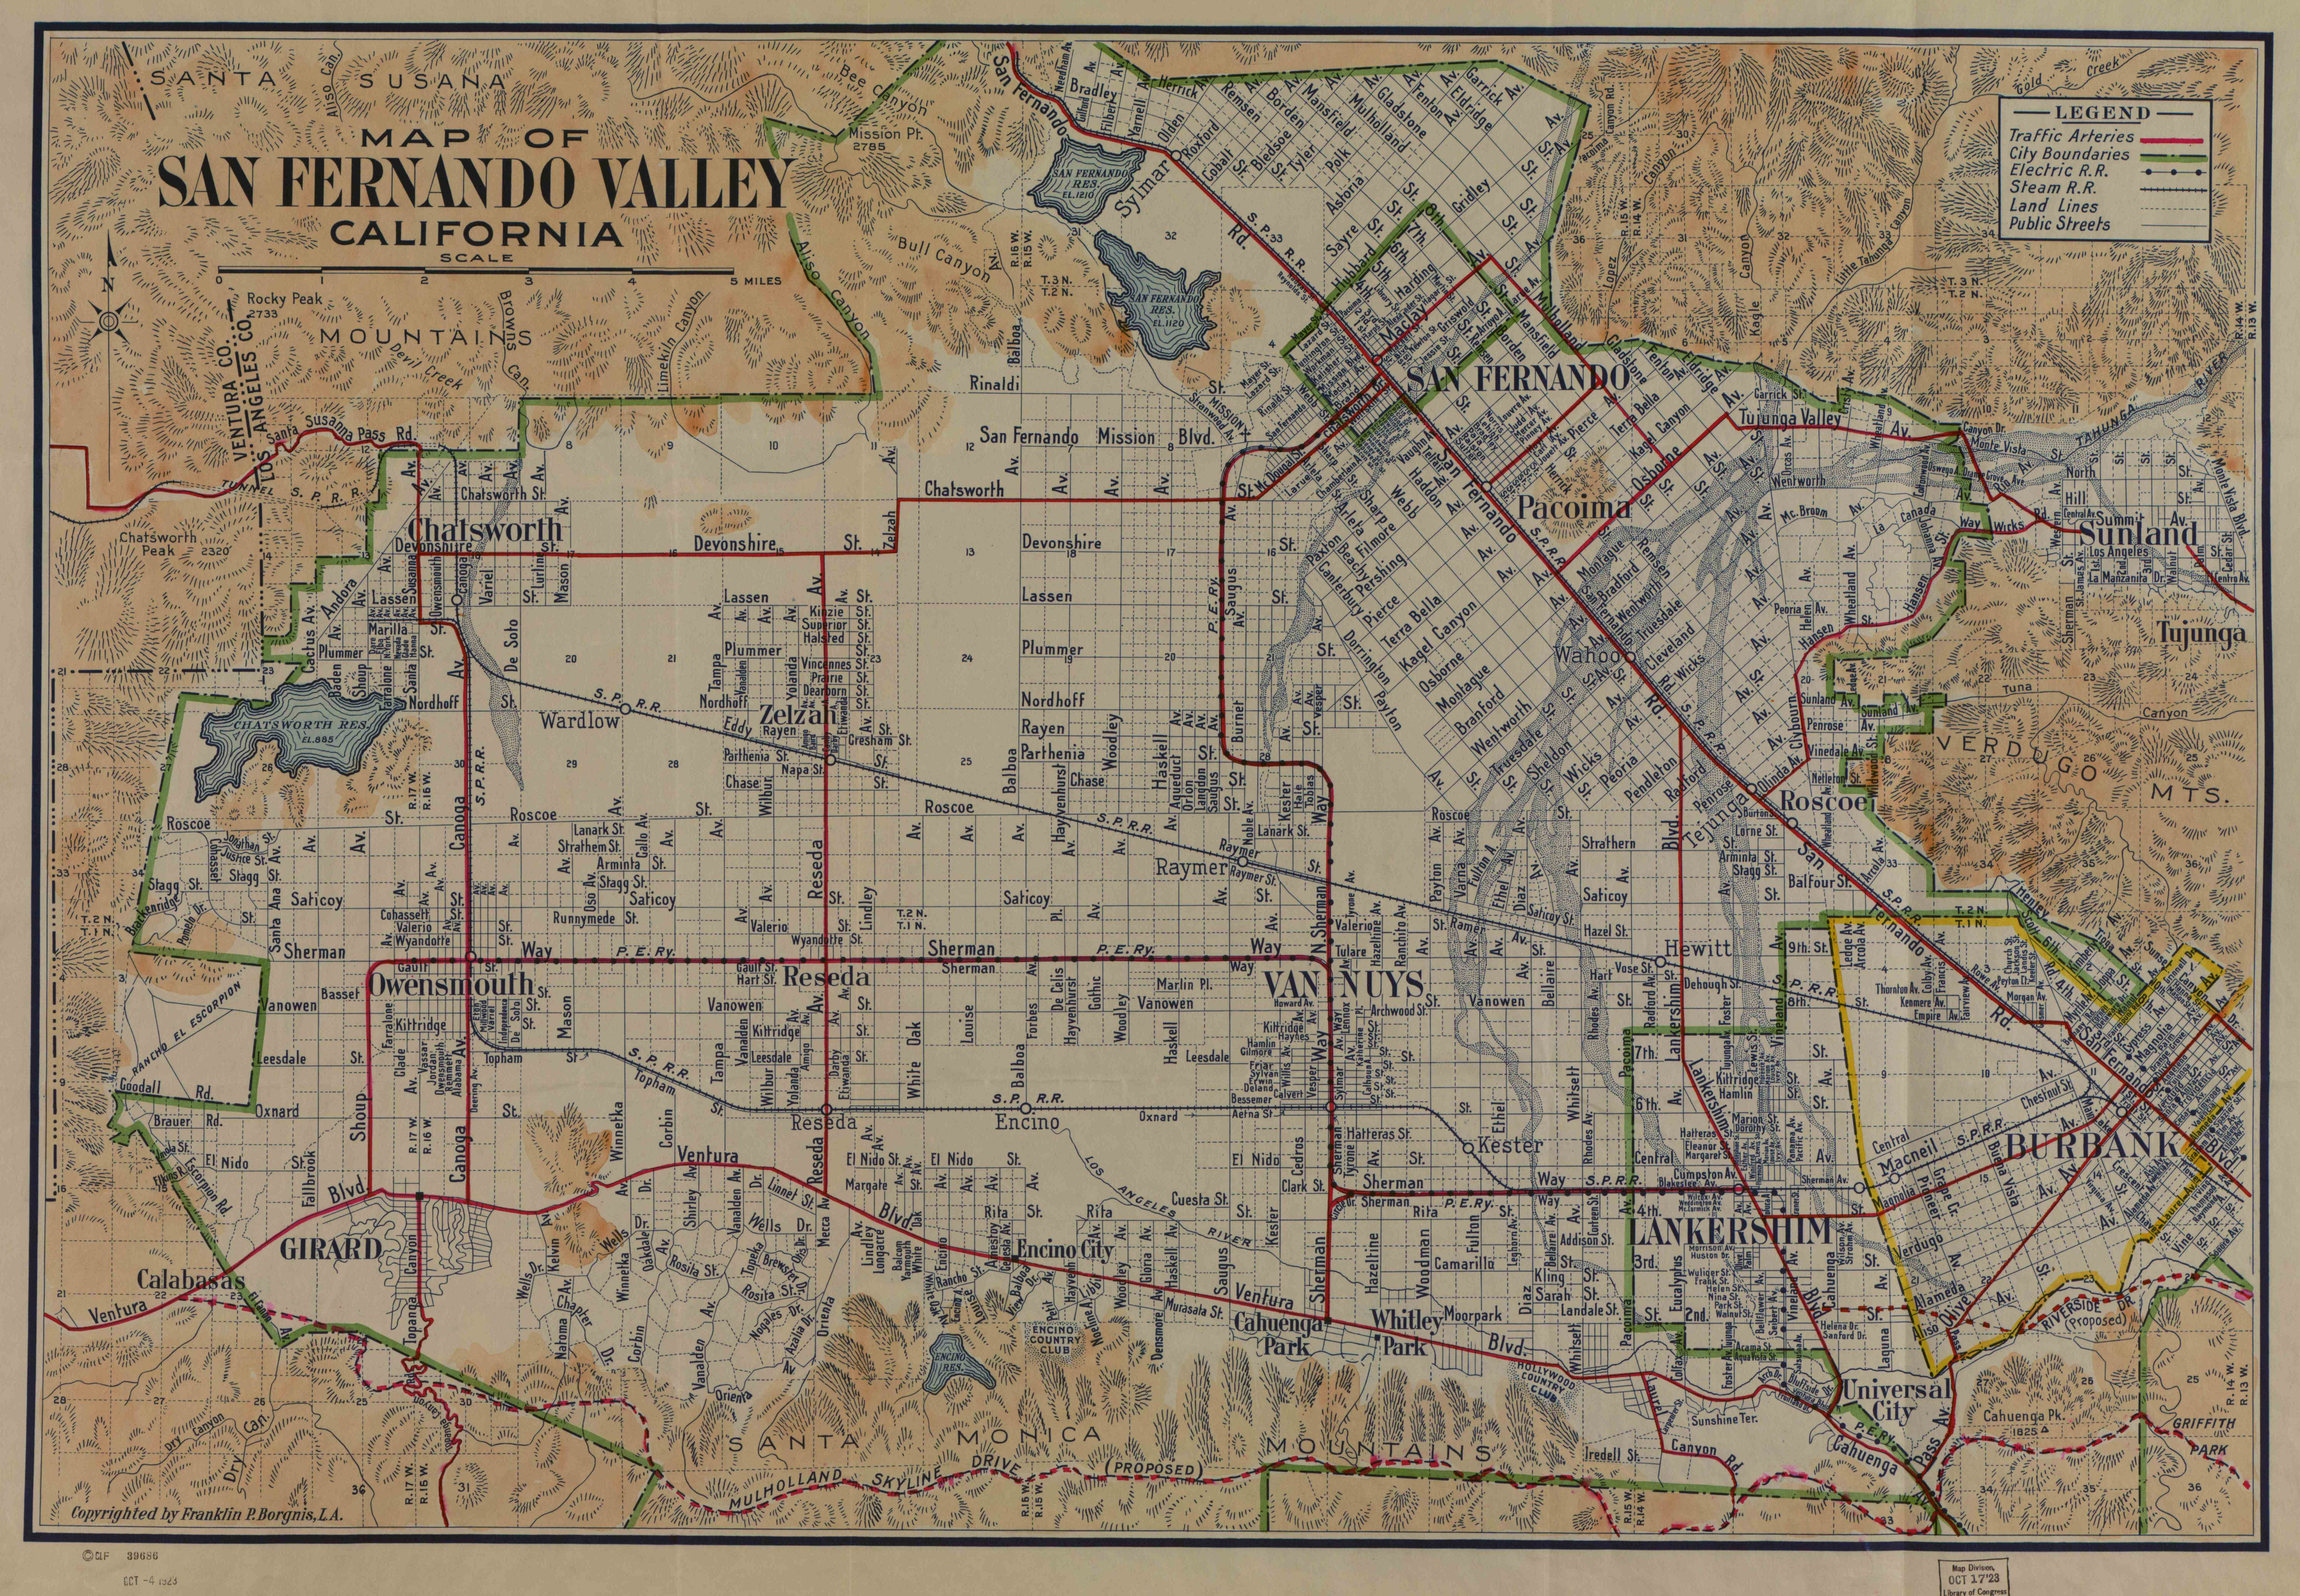 Map of the San Fernando Valley from 1923. Donated by Robert Aitchison